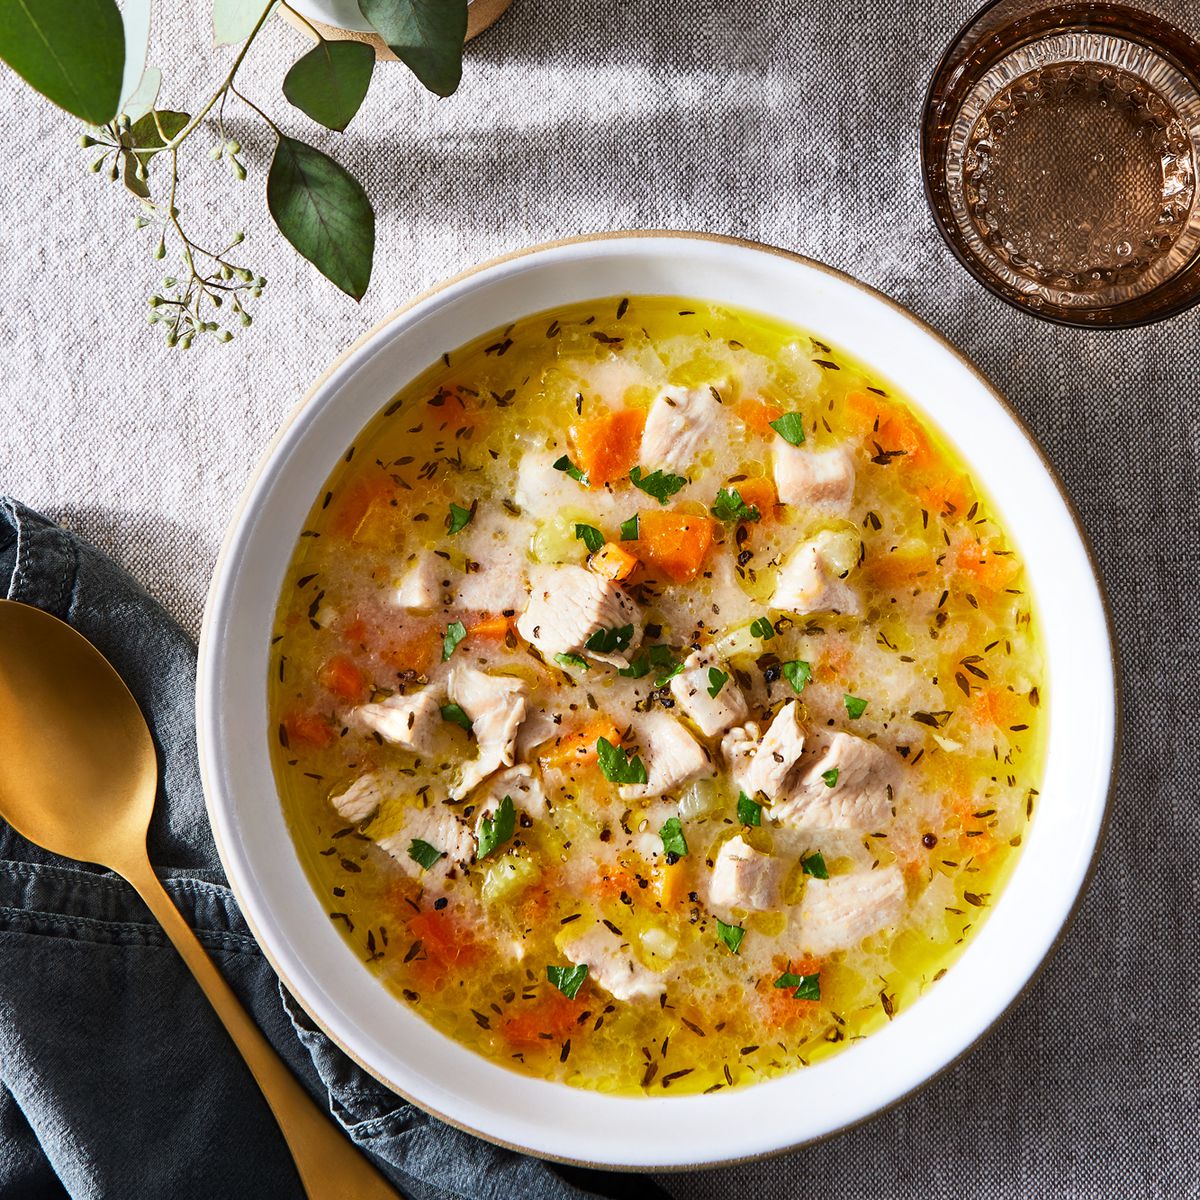 Best Leftover Turkey Soup Recipe - How to Make Easy Turkey Soup